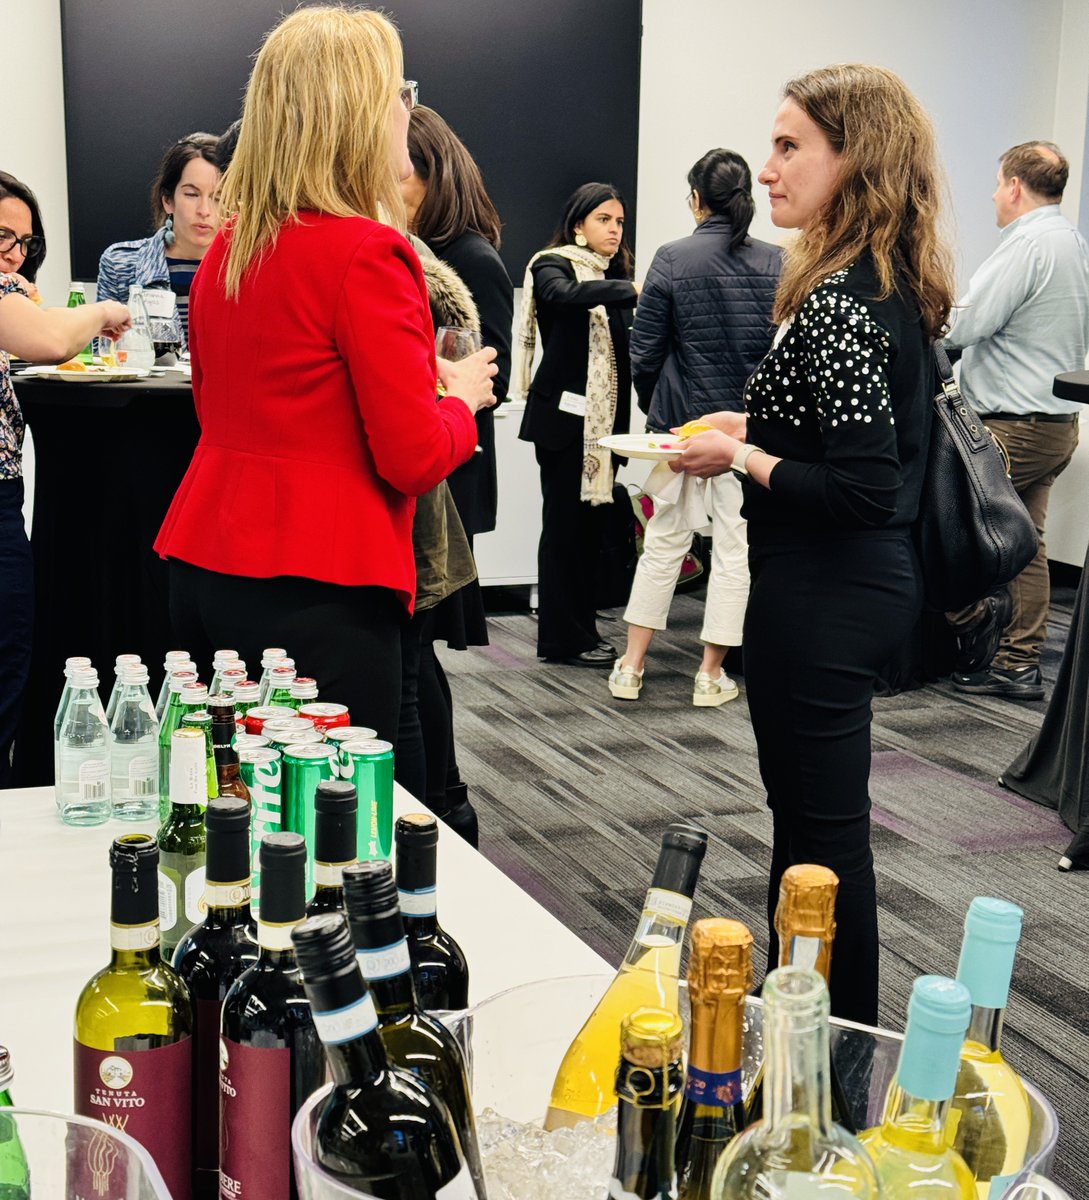 As we wrap up this busy week, we would like to thank everyone who attended last night's @WomenInBio_NY event which focused on catalyzing #growth for #startups! Special thanks to the expert speakers from the @NYCEDC for leading such a vibrant and engaging panel #networking